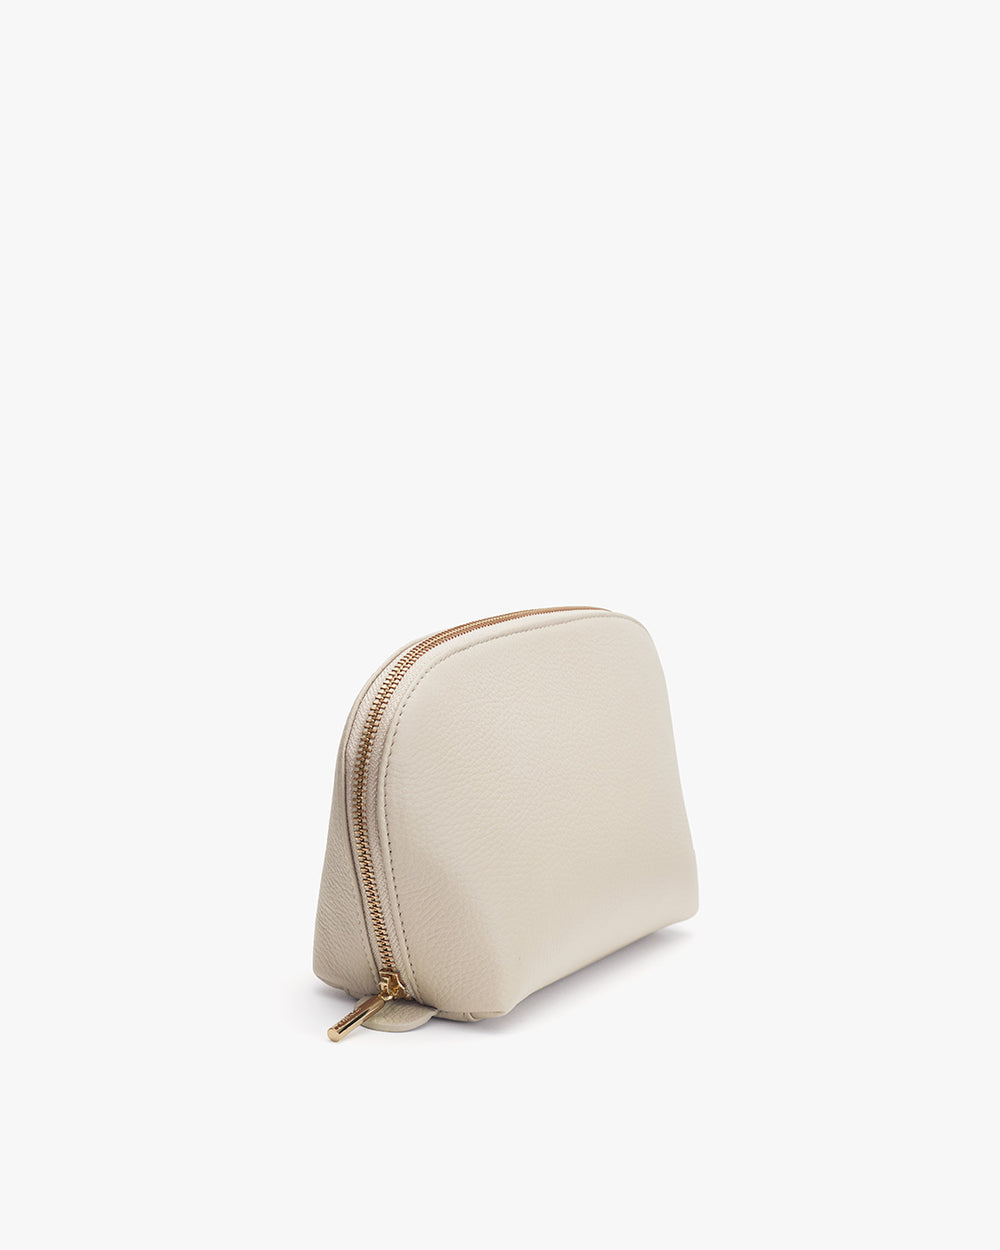 Small zippered cosmetic bag standing upright on a plain background.